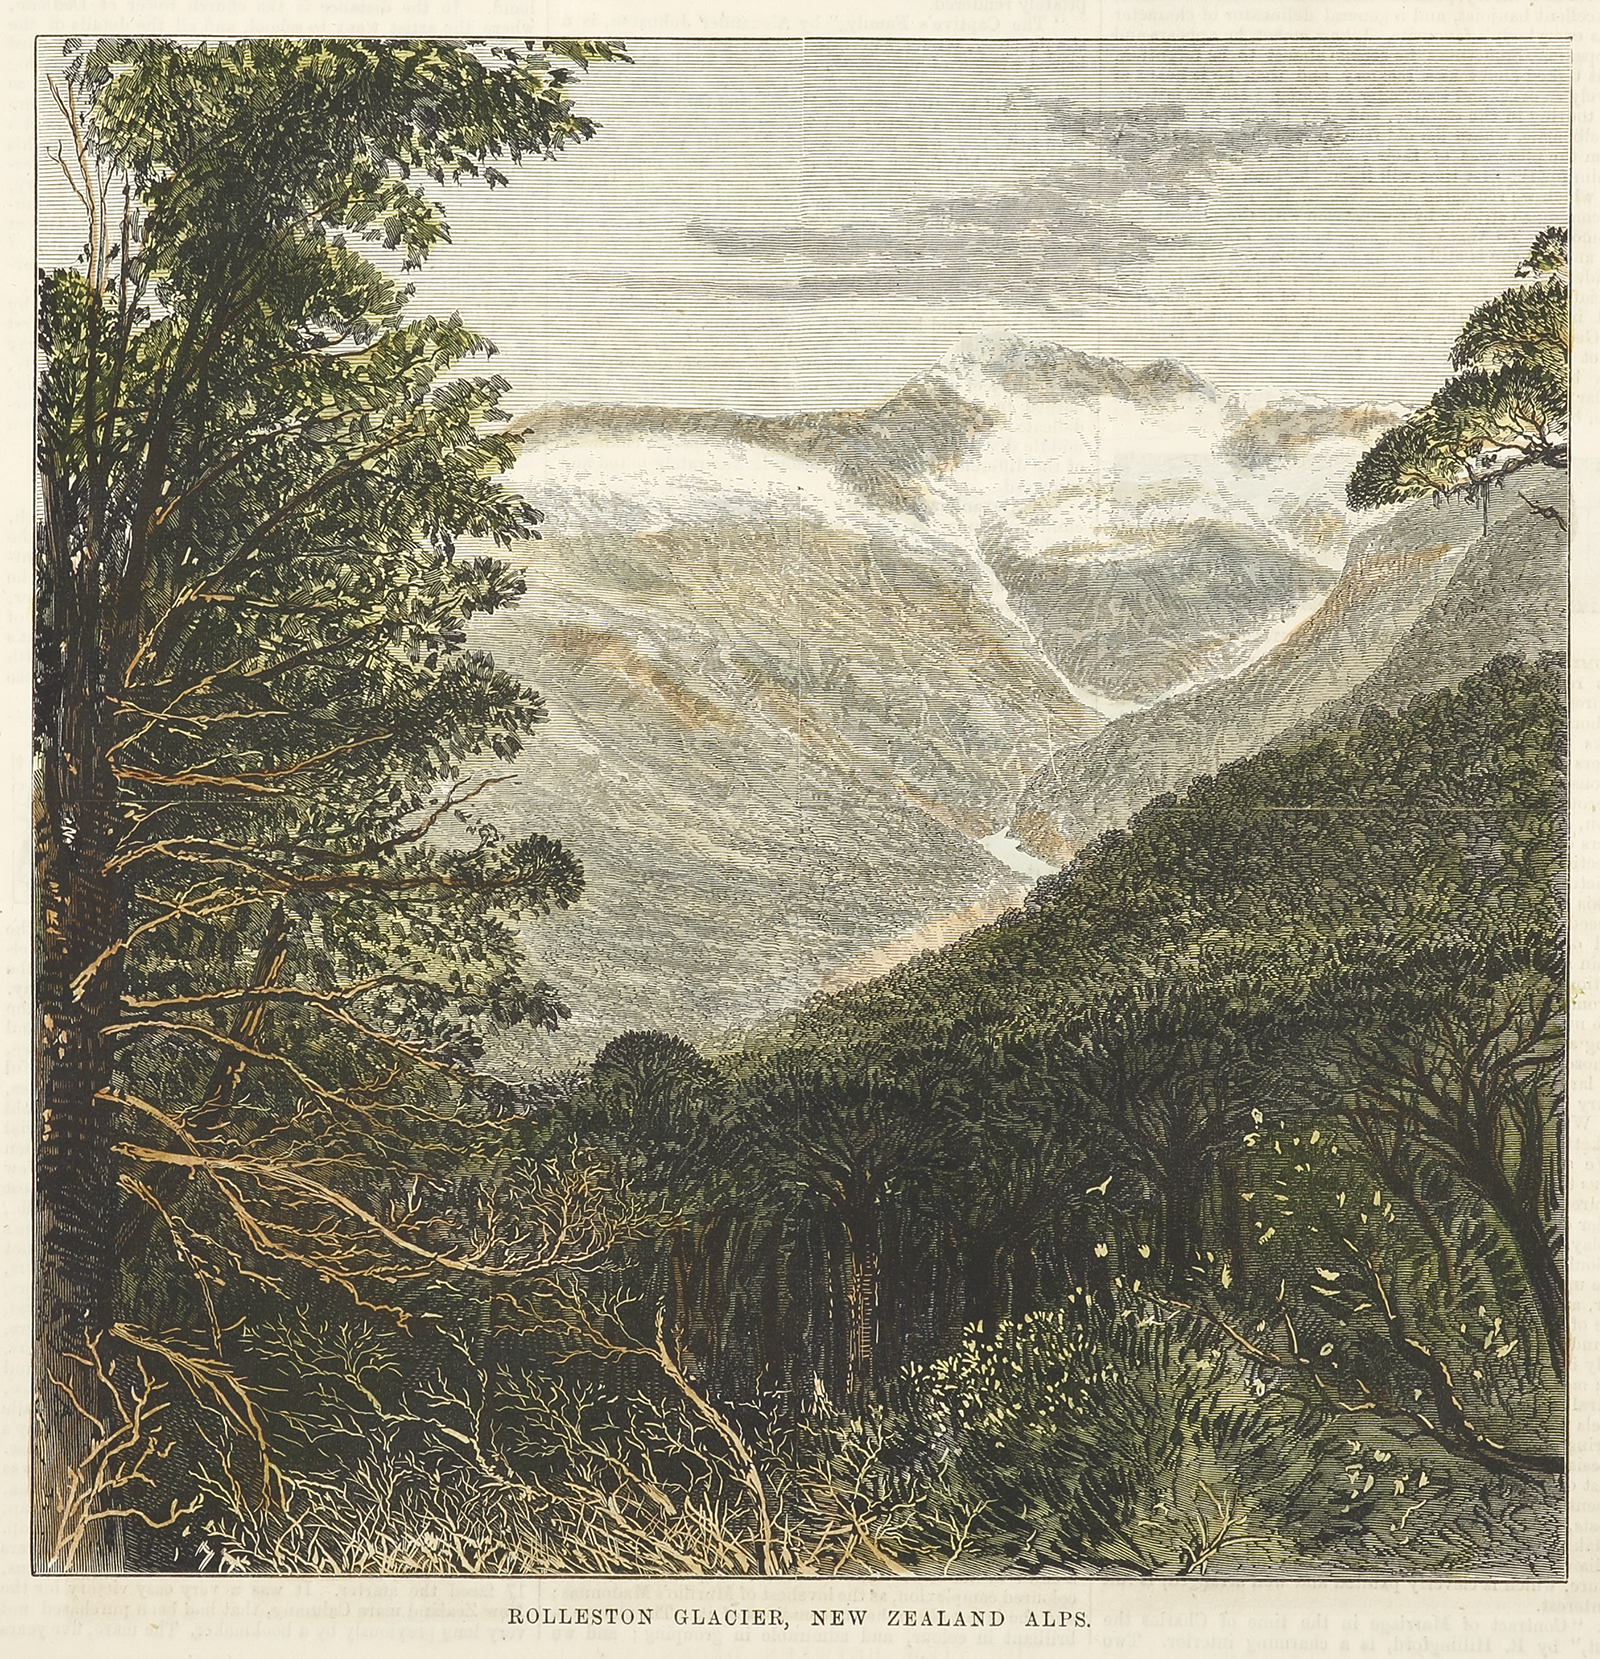 Rolleston Glacier, New Zealand Alps. - Antique View from 1875